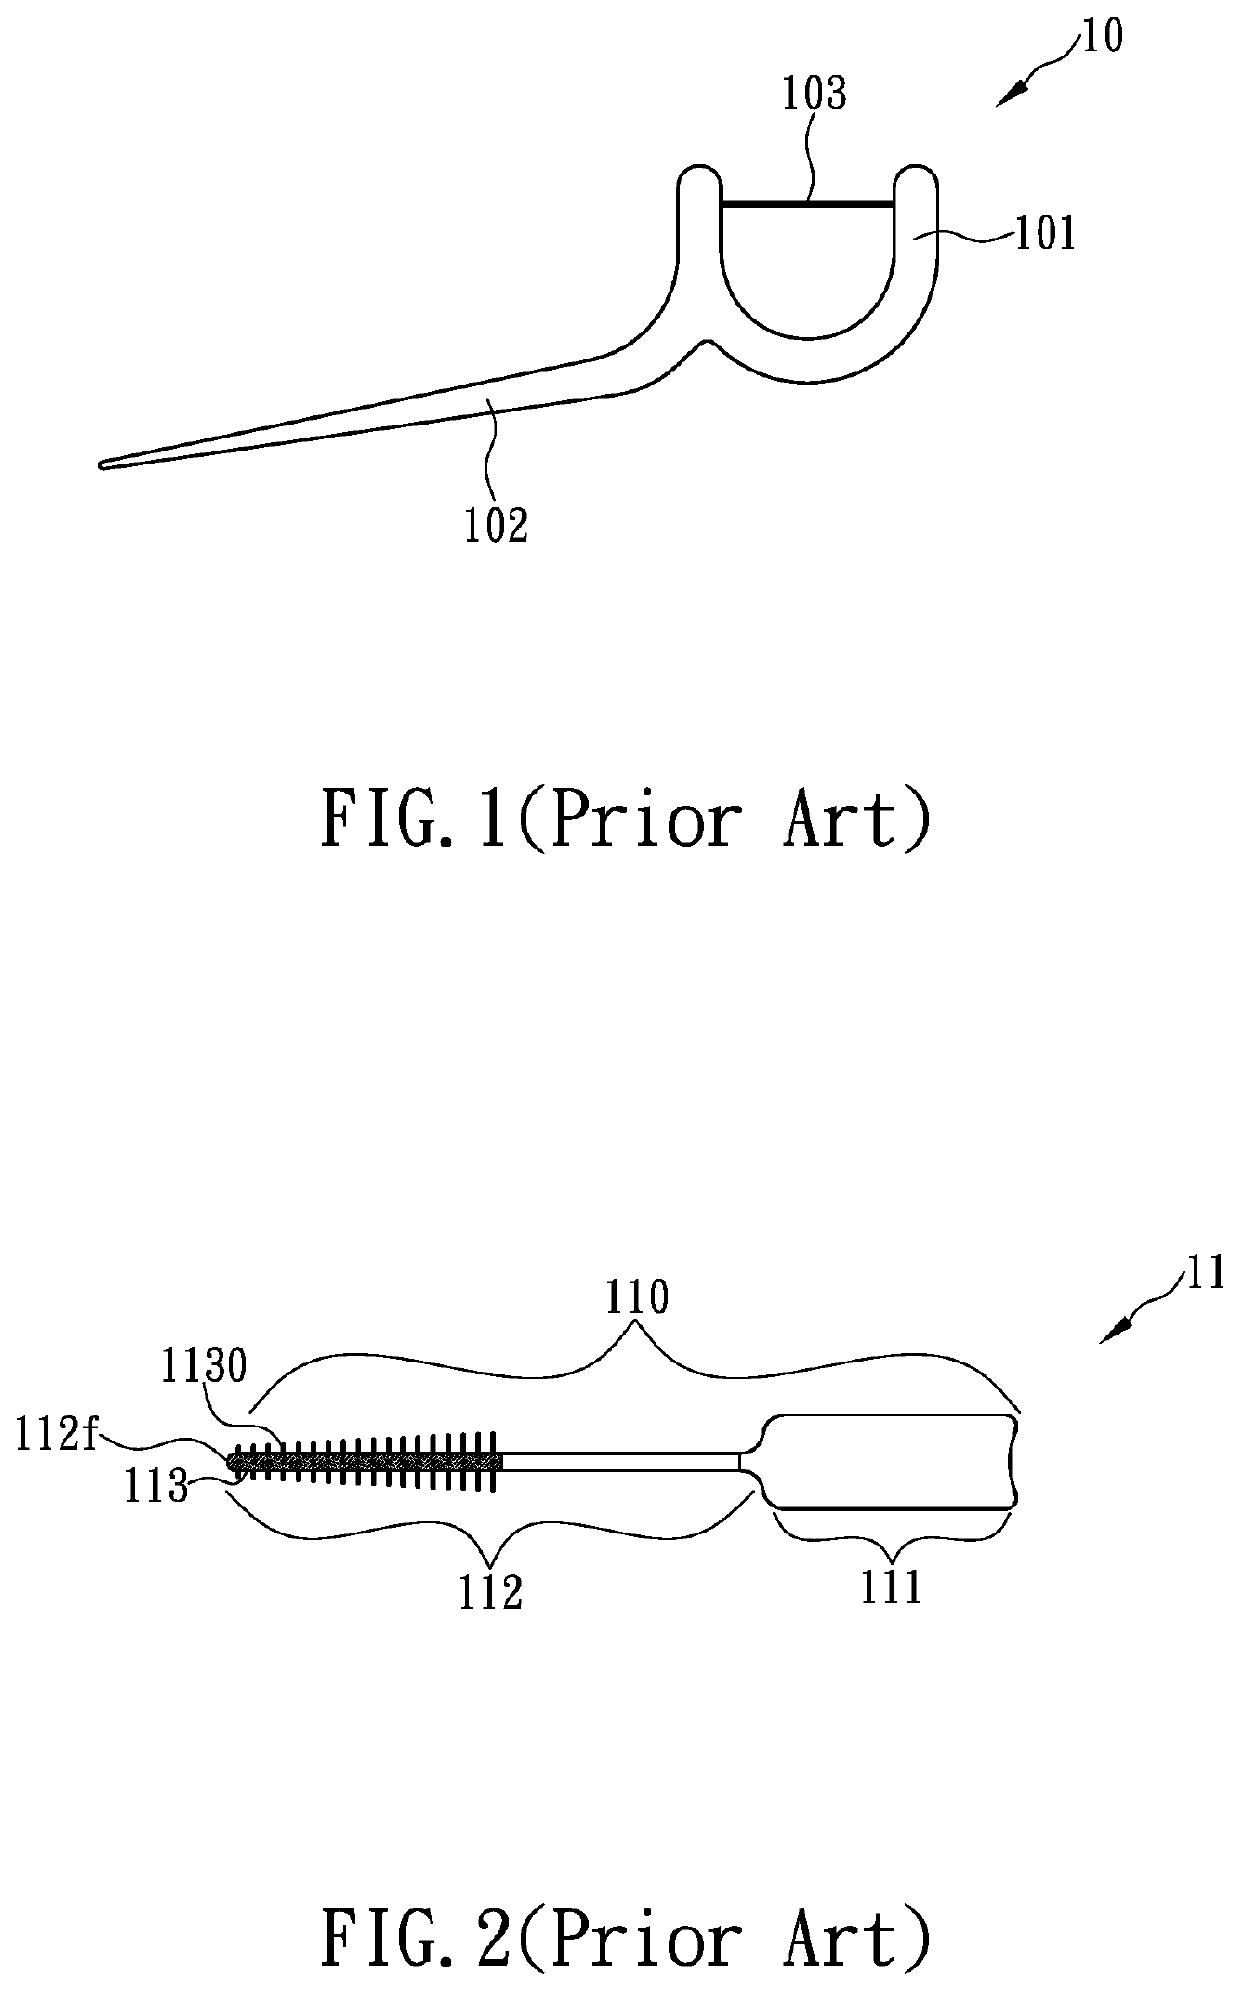 Three-in-one tooth-cleaning device structured as toothpick, interdental brush, and floss pick